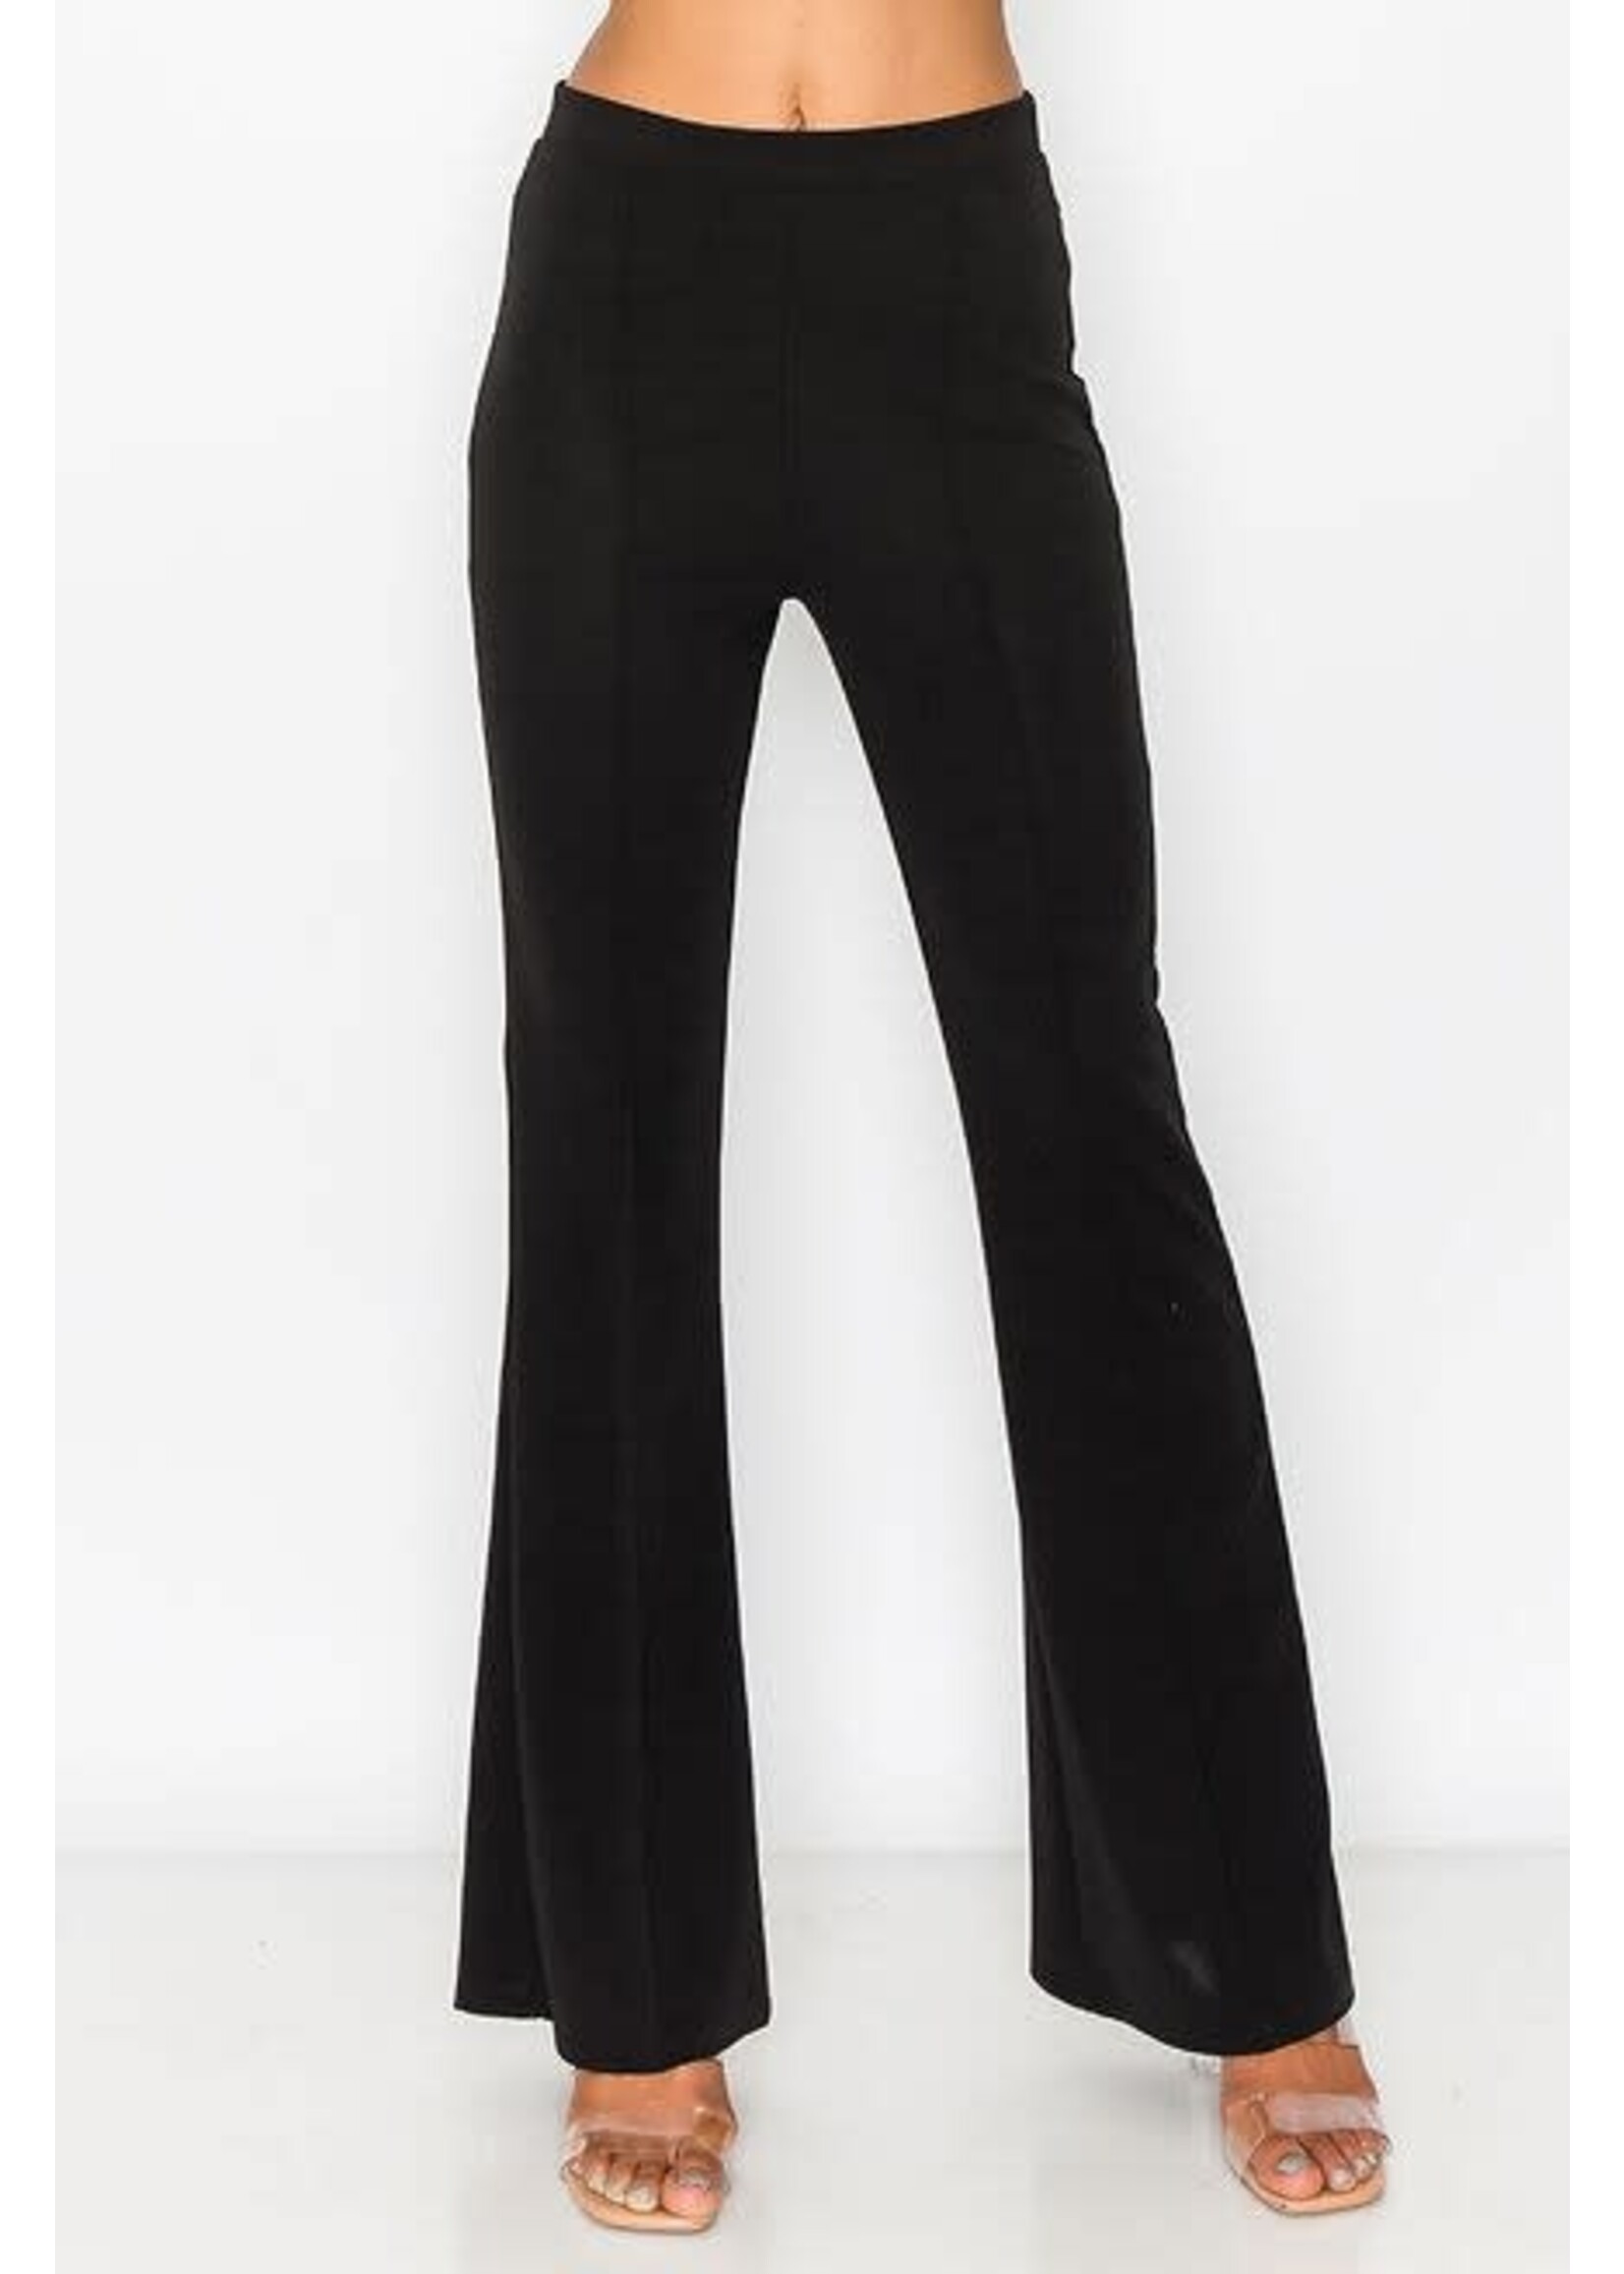 Stylive Pintuck Flare Pants